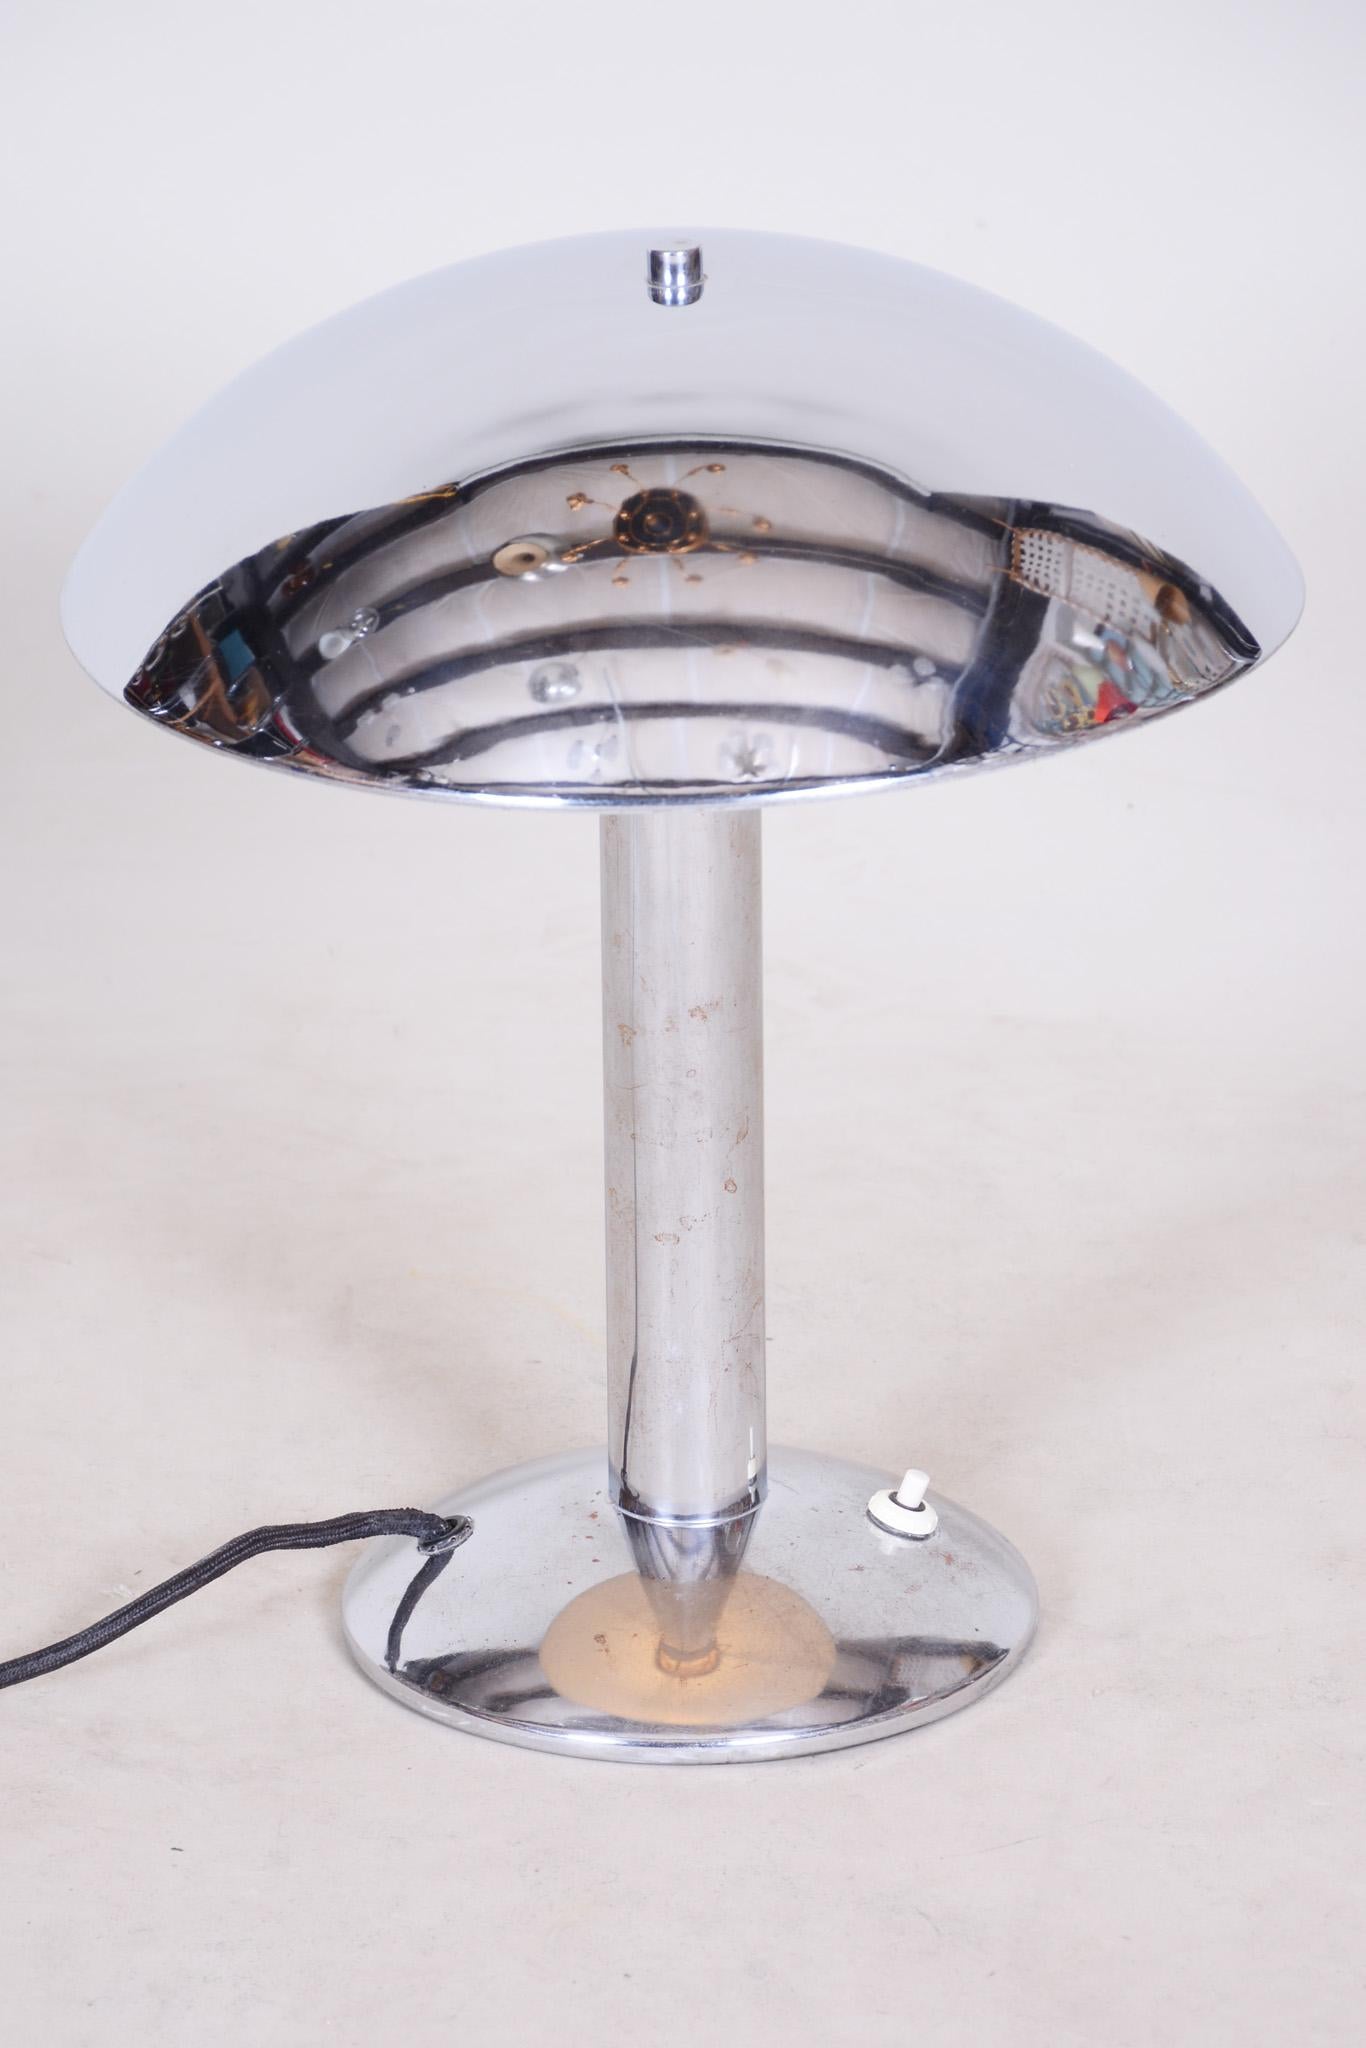 Czech Chrome Bauhaus Table Lamp, Original Condition and Electrified, 1930s In Good Condition For Sale In Horomerice, CZ